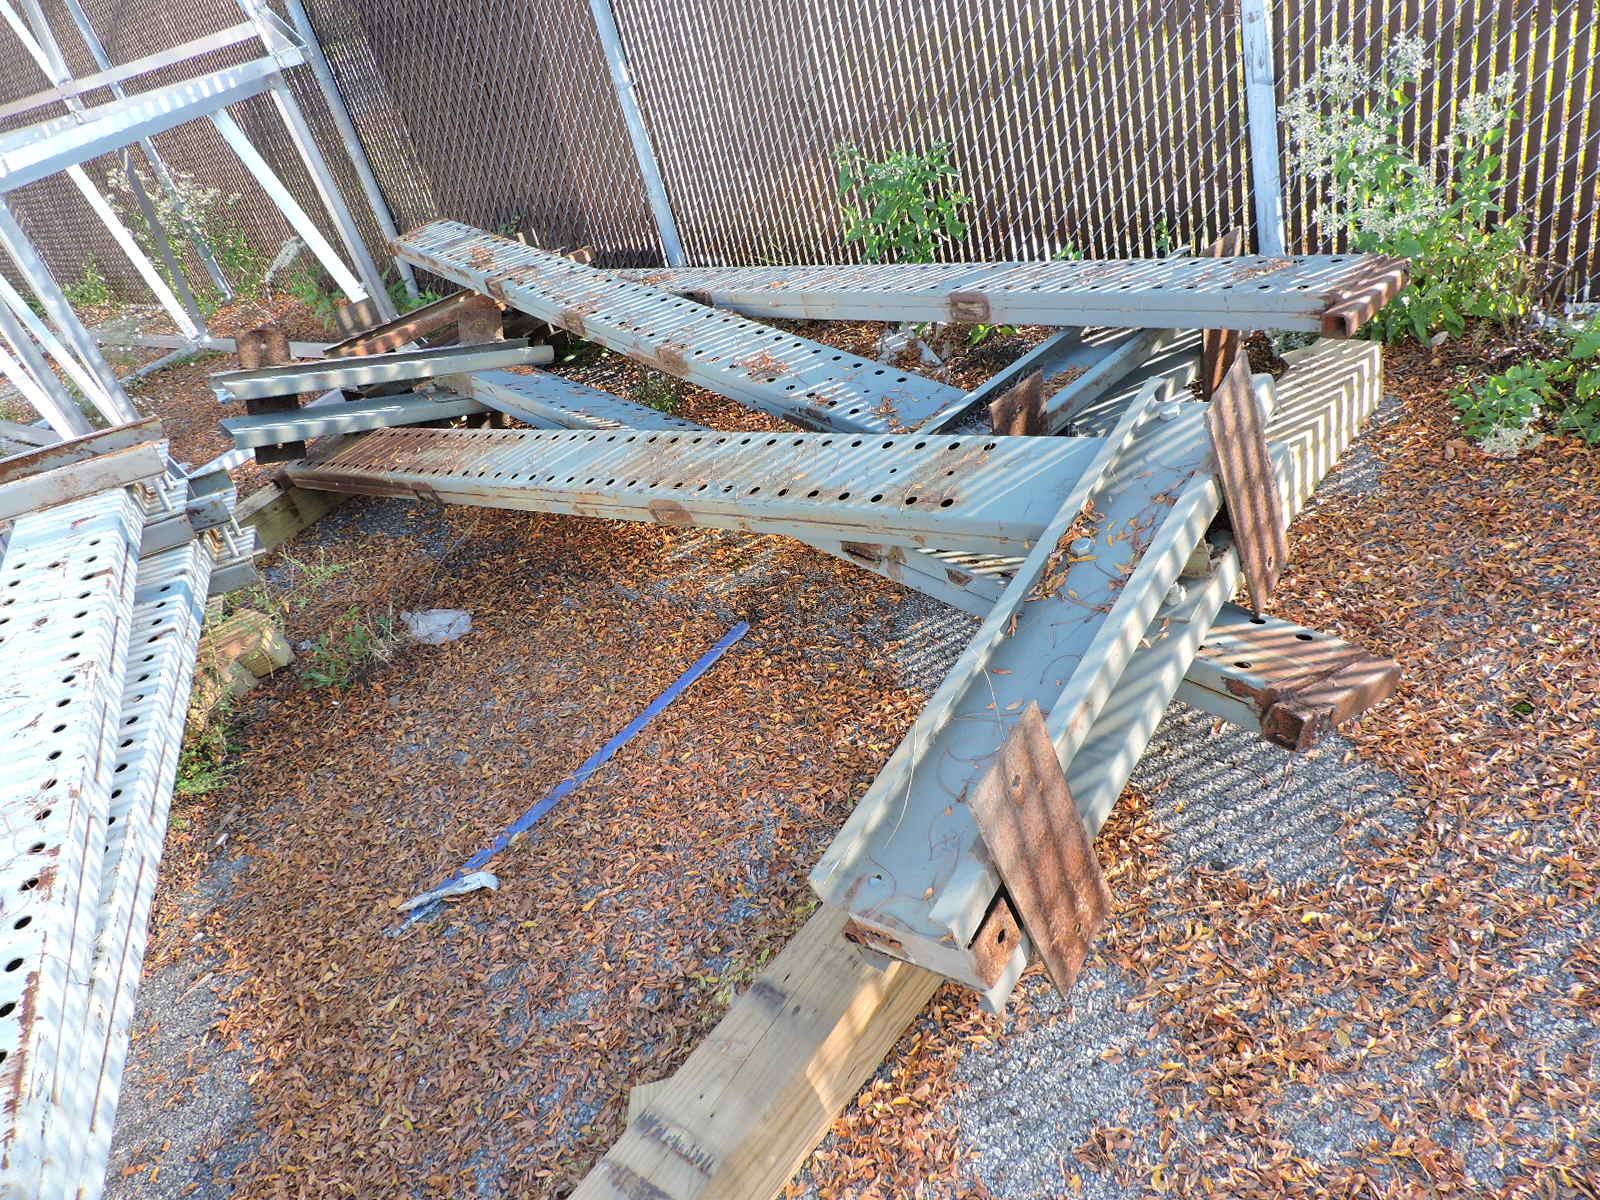 Large Assortment of Pallet Racking Parts - Uprights and Shelf Parts - See Photos